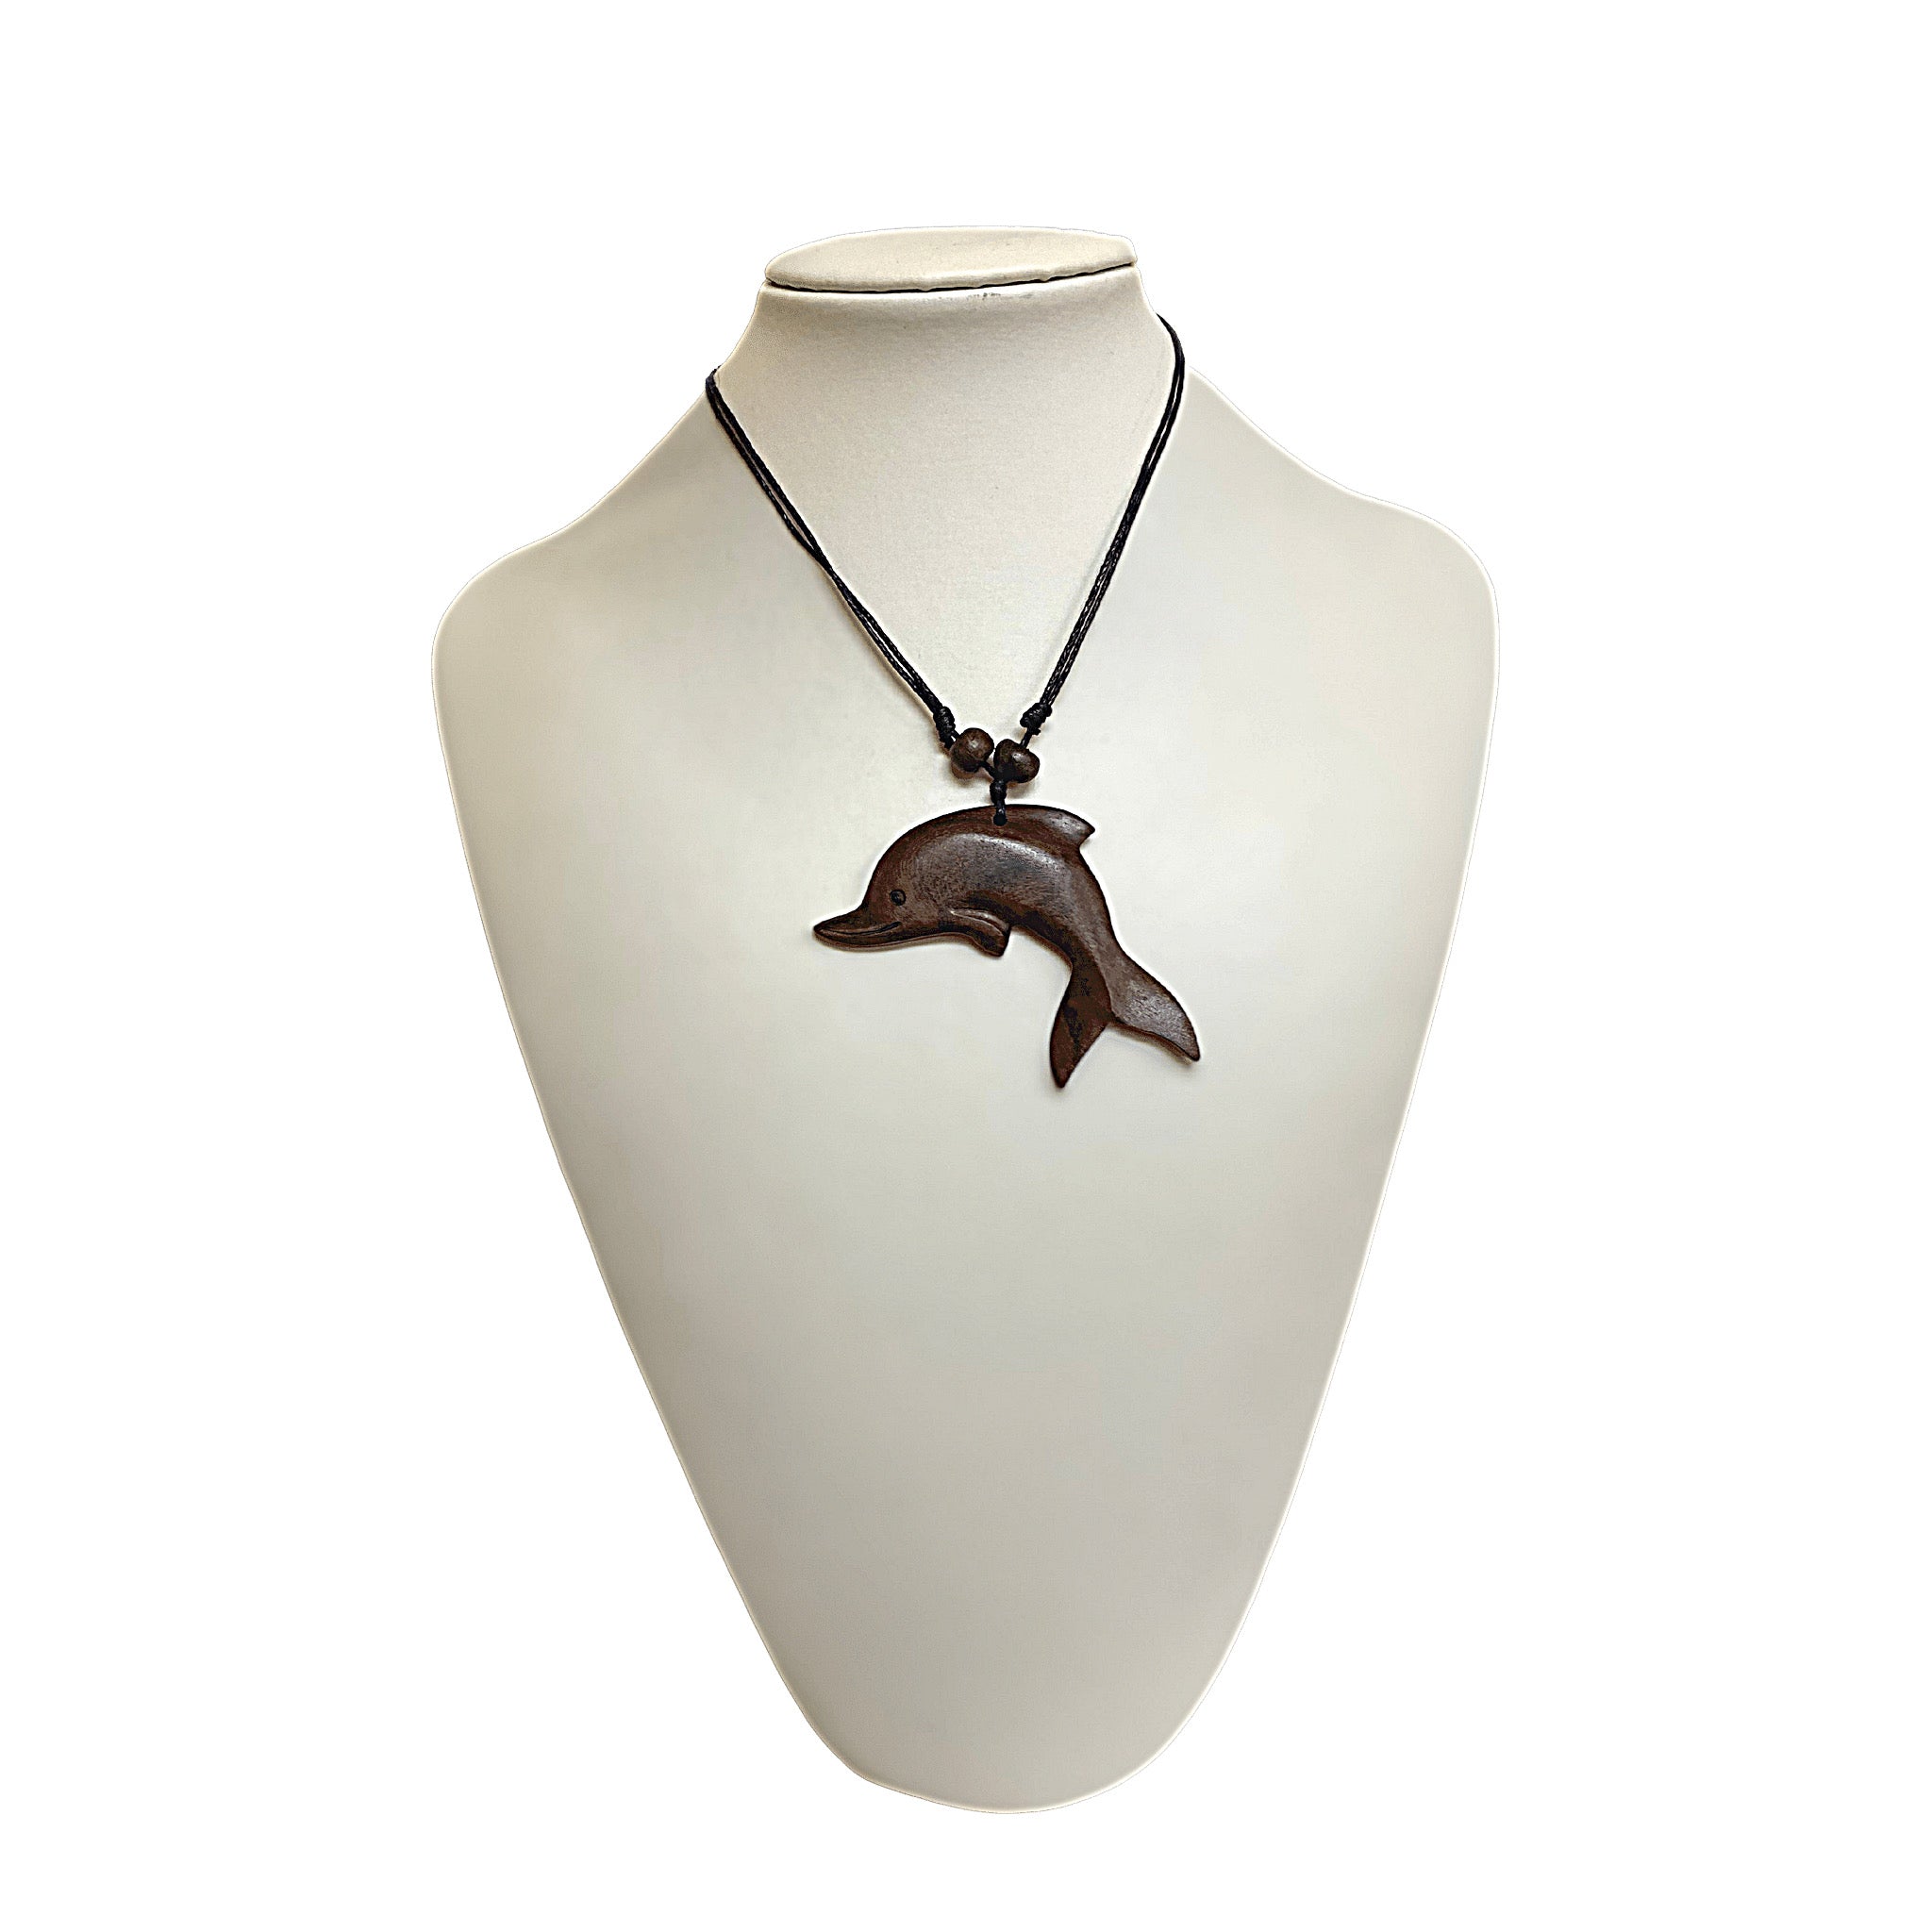 Dolphin Necklace Wooden hand carved Dolphine necklace  Ironwood Personolaized Wooden  Pendant, Sea Animal Nautical Wood Jewelry One of a Kind Gift for Him Her - Tobmarc Home Decor & Gifts 